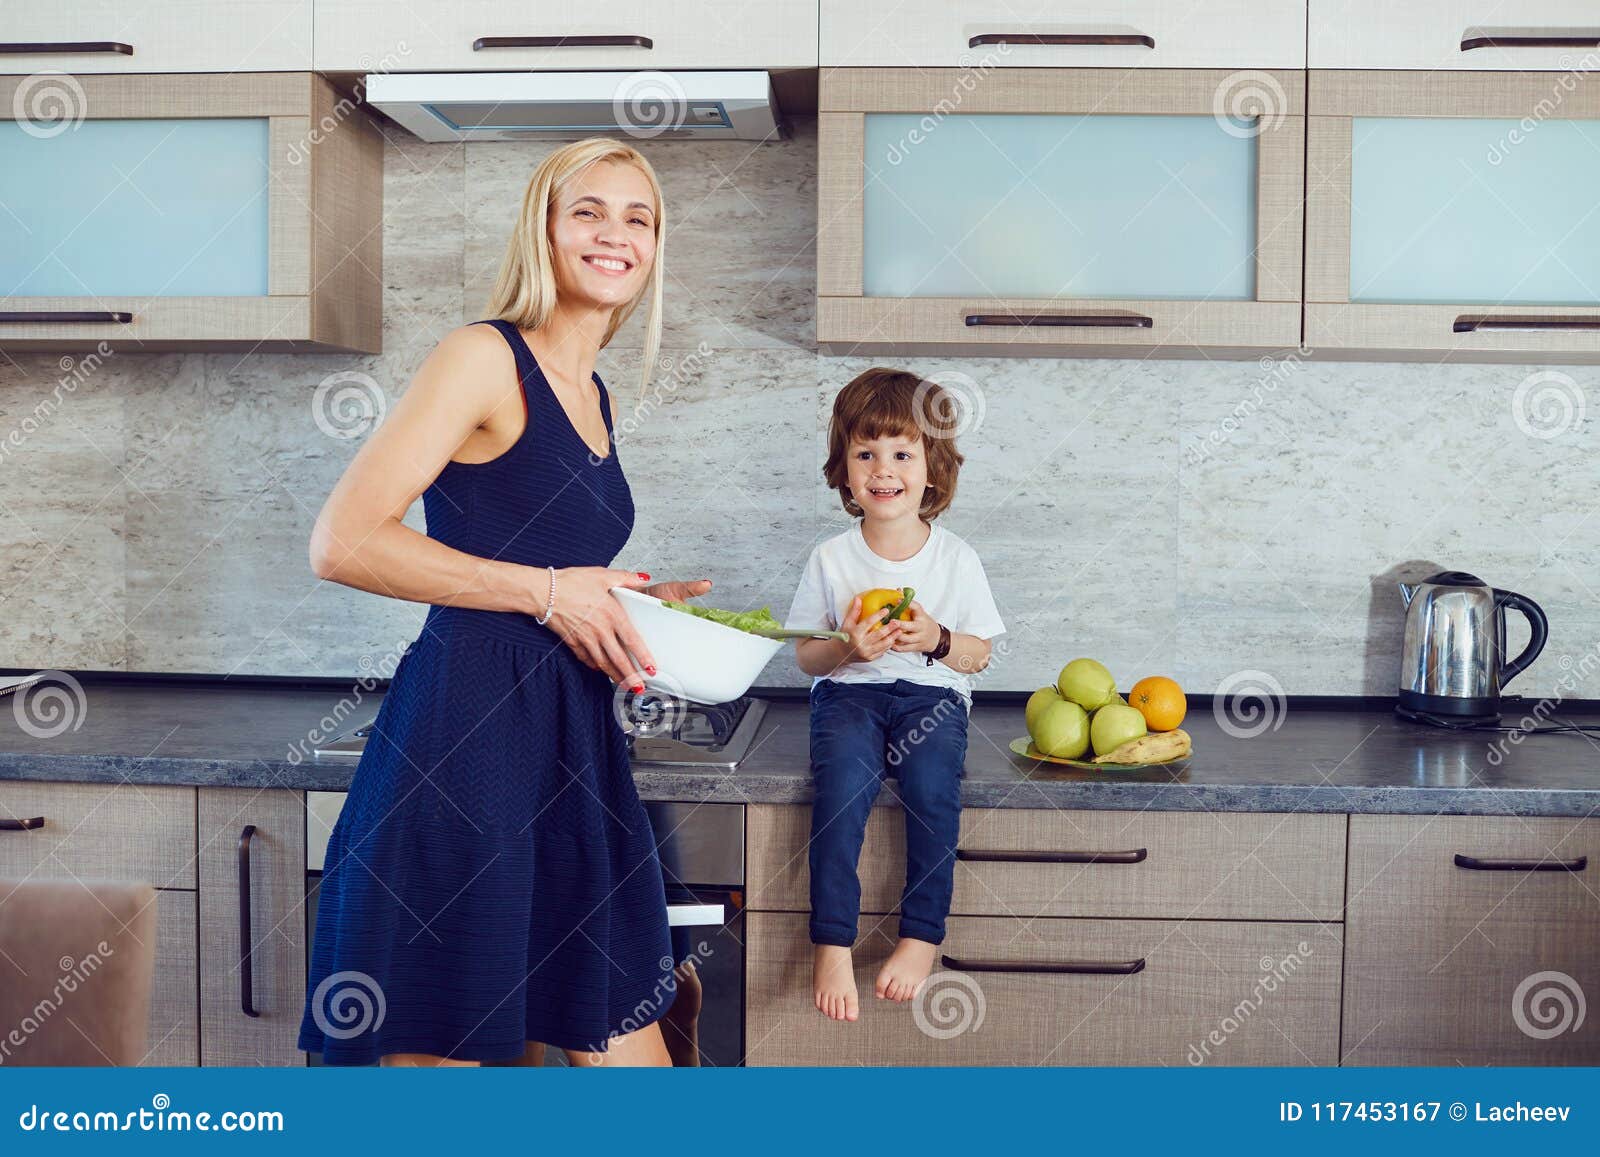 Mother And Son In The Kitchen Stock Image Image Of Healthy